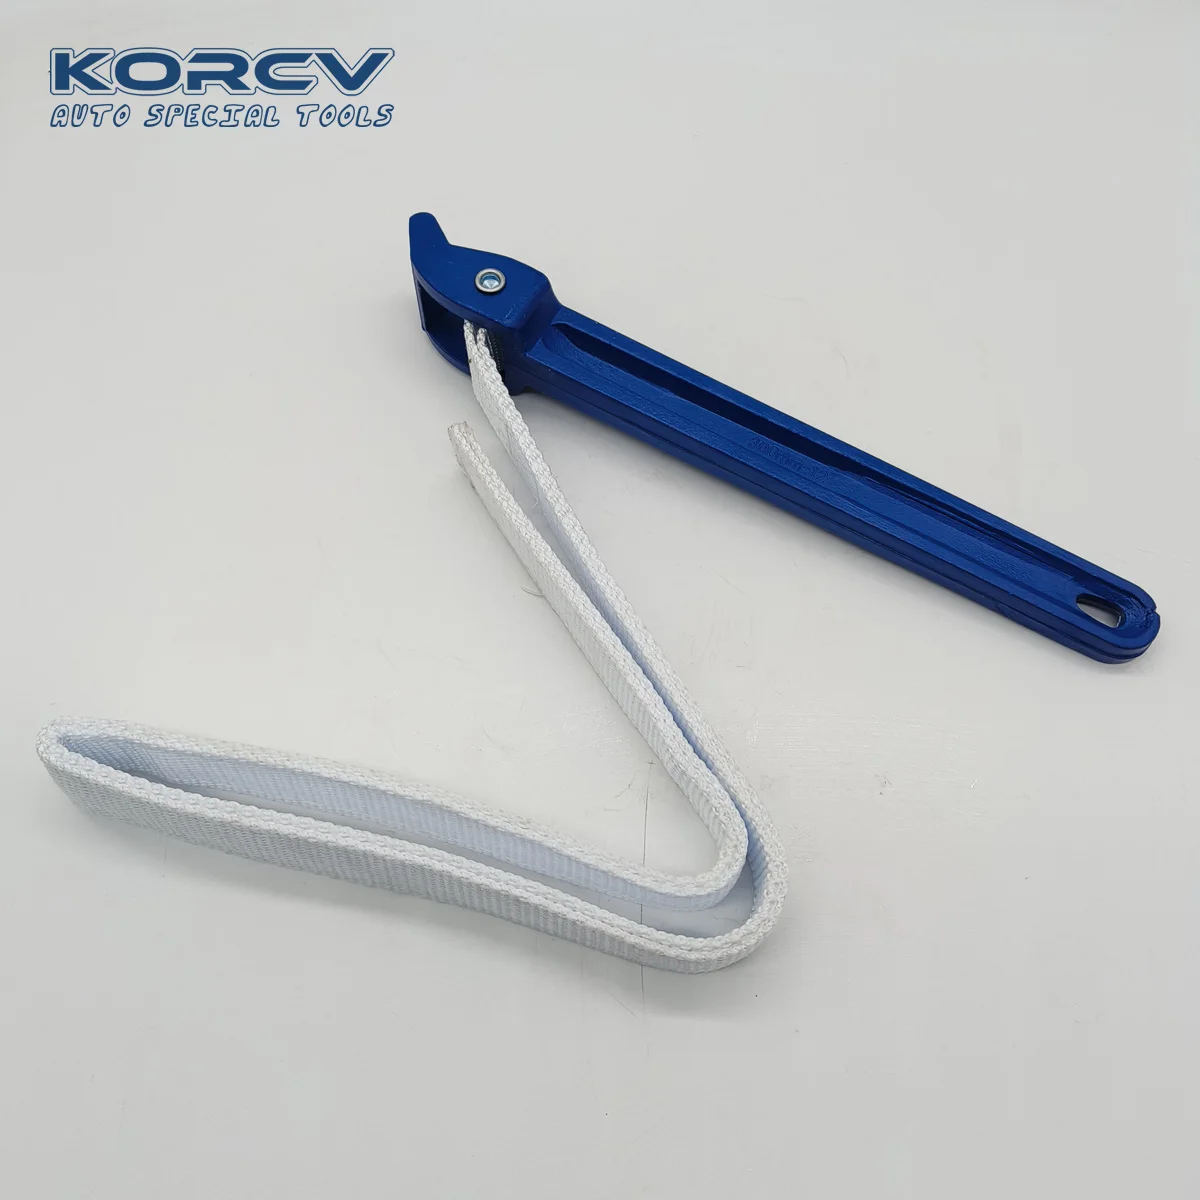 Special Tools for Volvo Trucks JD030 9999179 Aluminum Handle Filter Wrench 300mm-12